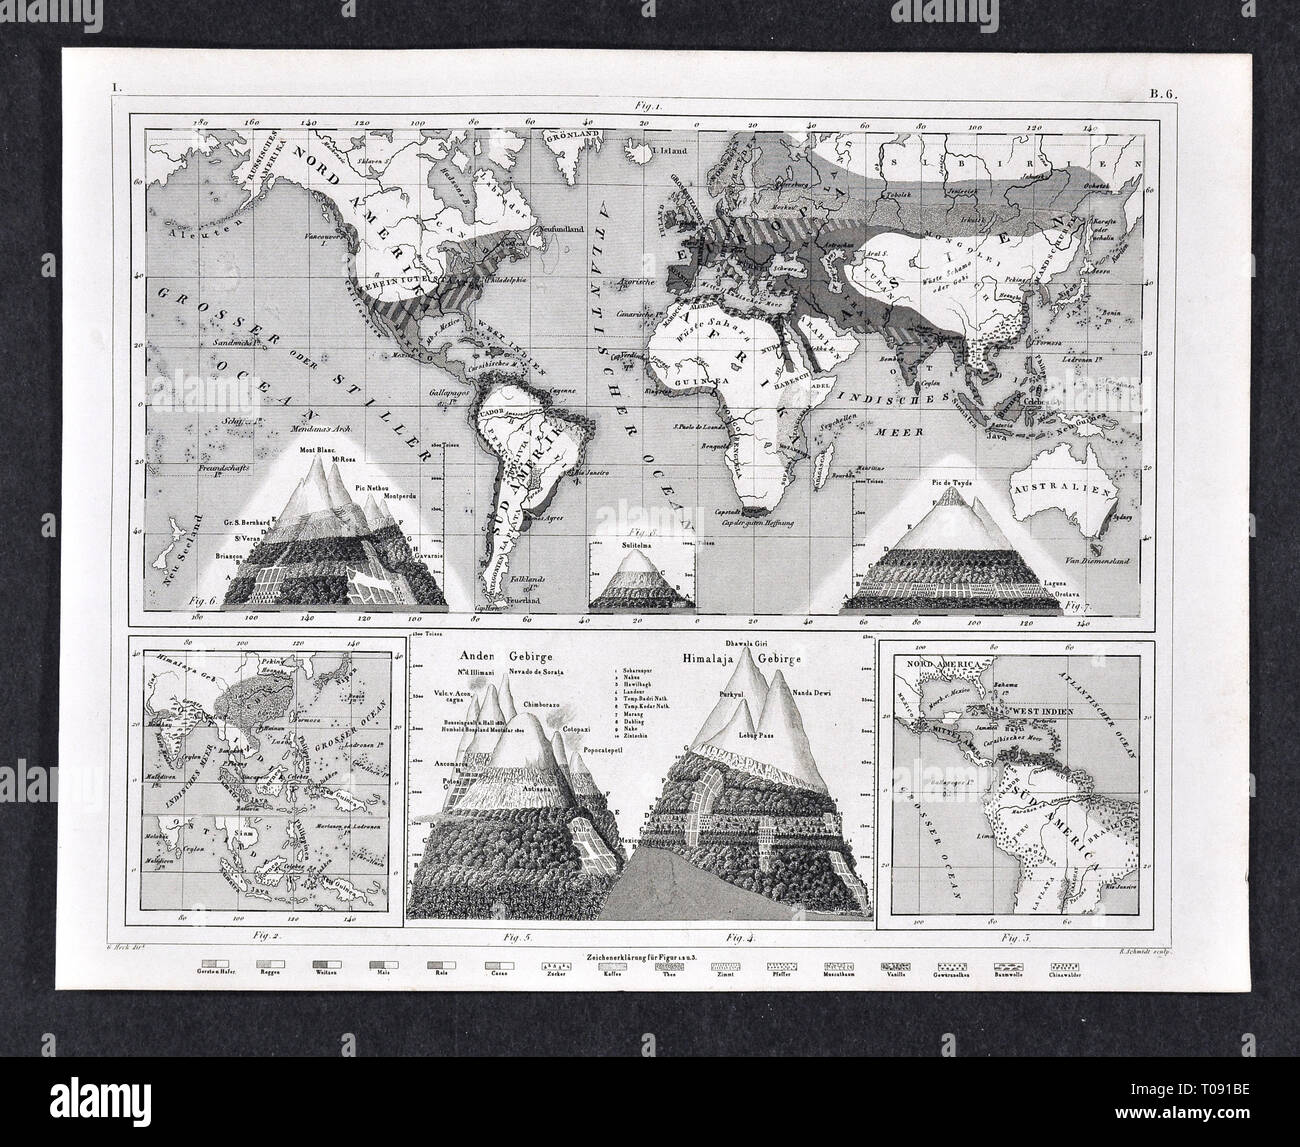 1849 Bilder World Map of Climate Zones and Biomes Stock Photo